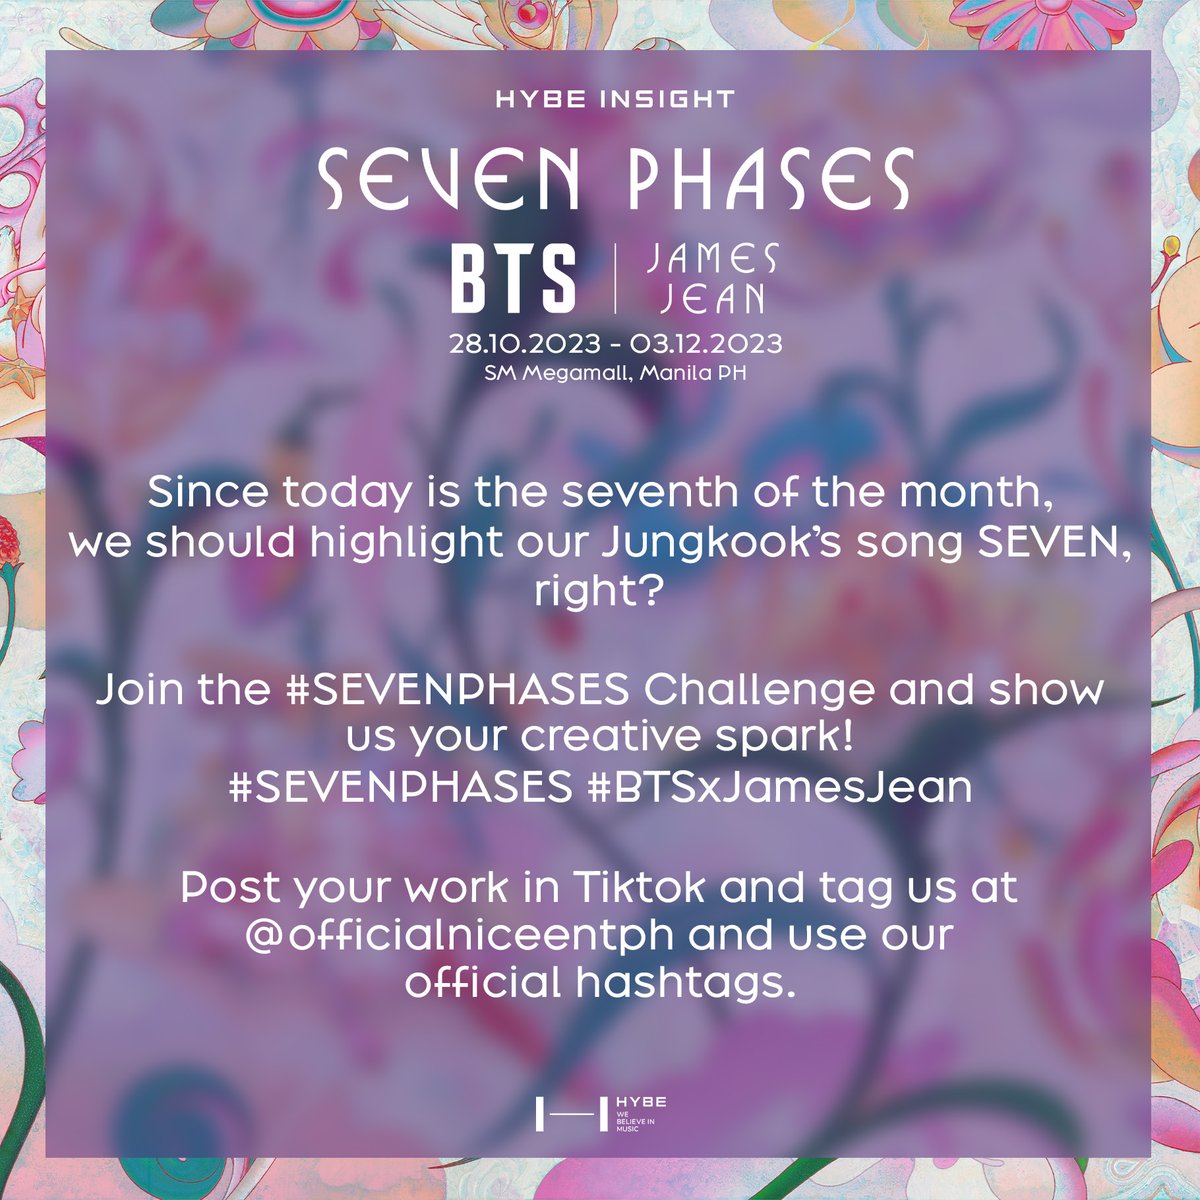 Since today is the seventh of the month, we should highlight our Jungkook's song SEVEN, right?  Join the #SEVENPHASESChallenge and show us your creative spark! #SEVENPHASES #BTSxJamesJean

#BTS #방탄소년단 #JamesJean #BTS_7phases_exhibition #BTS_7phases